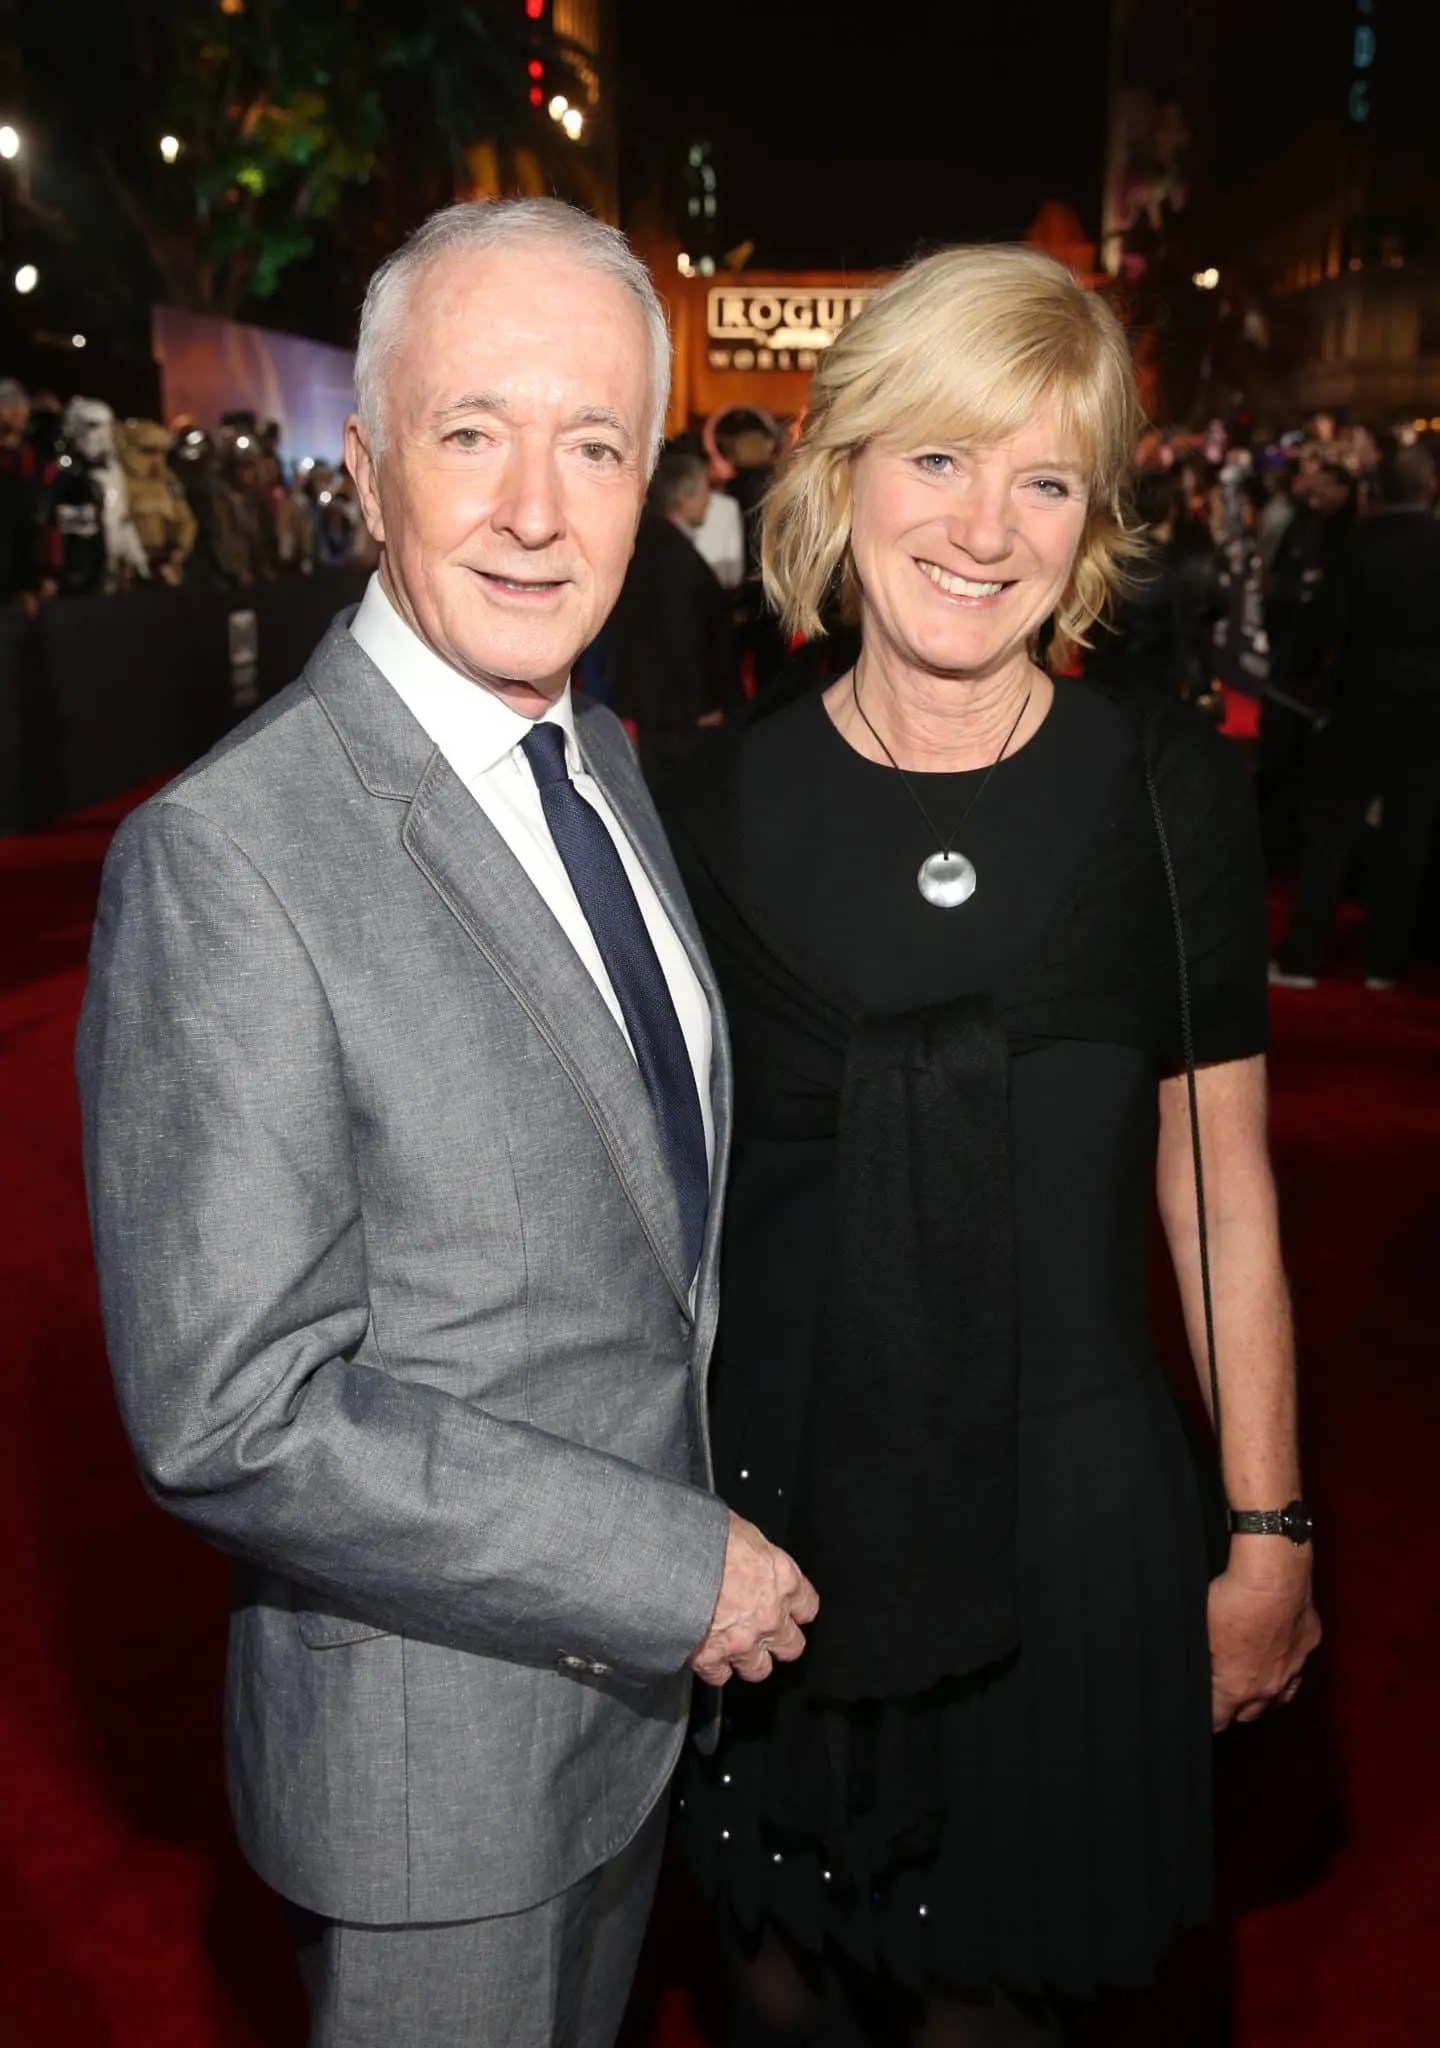 HOLLYWOOD, CA - DECEMBER 10:  Actor Anthony Daniels and Christine Savage attend The World Premiere of Lucasfilm's highly anticipated, first-ever, standalone Star Wars adventure, "Rogue One: A Star Wars Story" at the Pantages Theatre on December 10, 2016 in Hollywood, California.  (Photo by Jesse Grant/Getty Images for Disney) *** Local Caption *** Anthony Daniels; Christine Savage